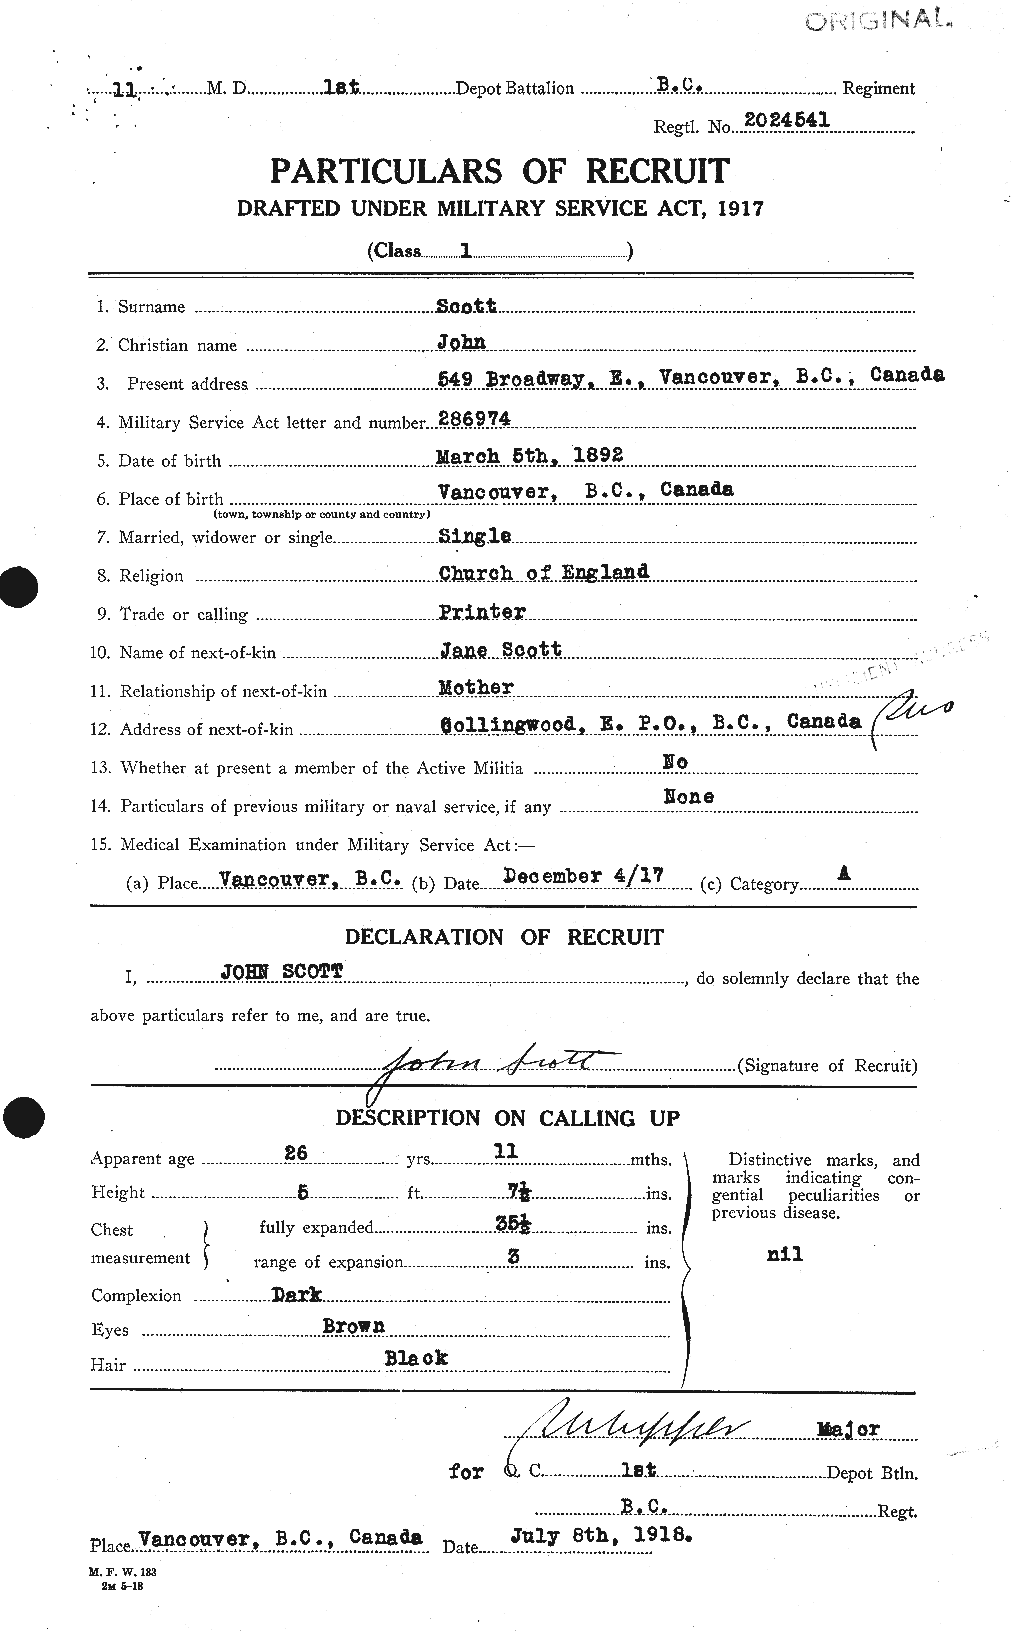 Personnel Records of the First World War - CEF 084932a